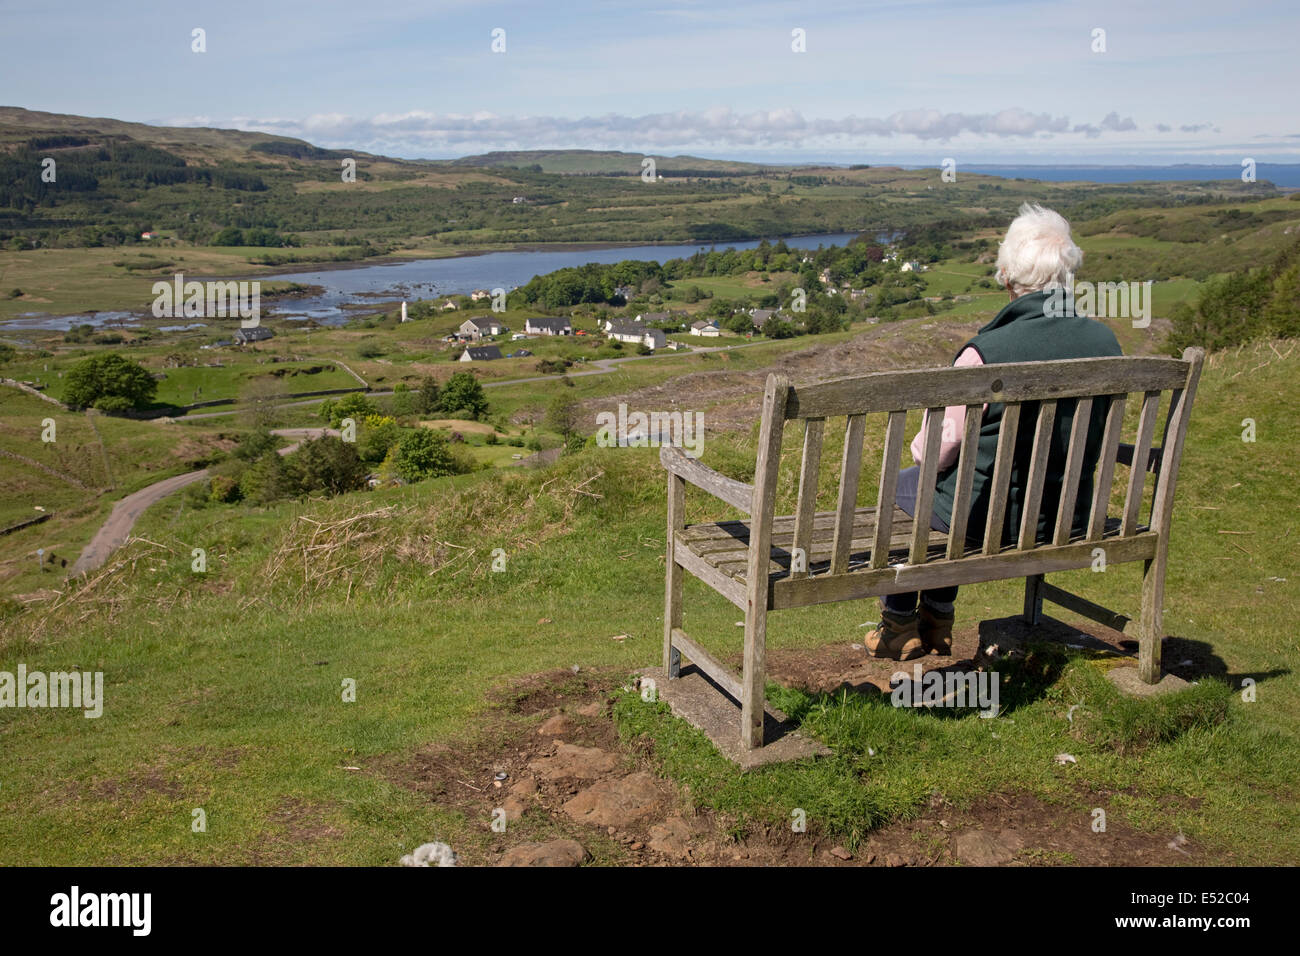 Woman sitting on bench admiring view Dervaig Isle of Mull Scotland Stock Photo